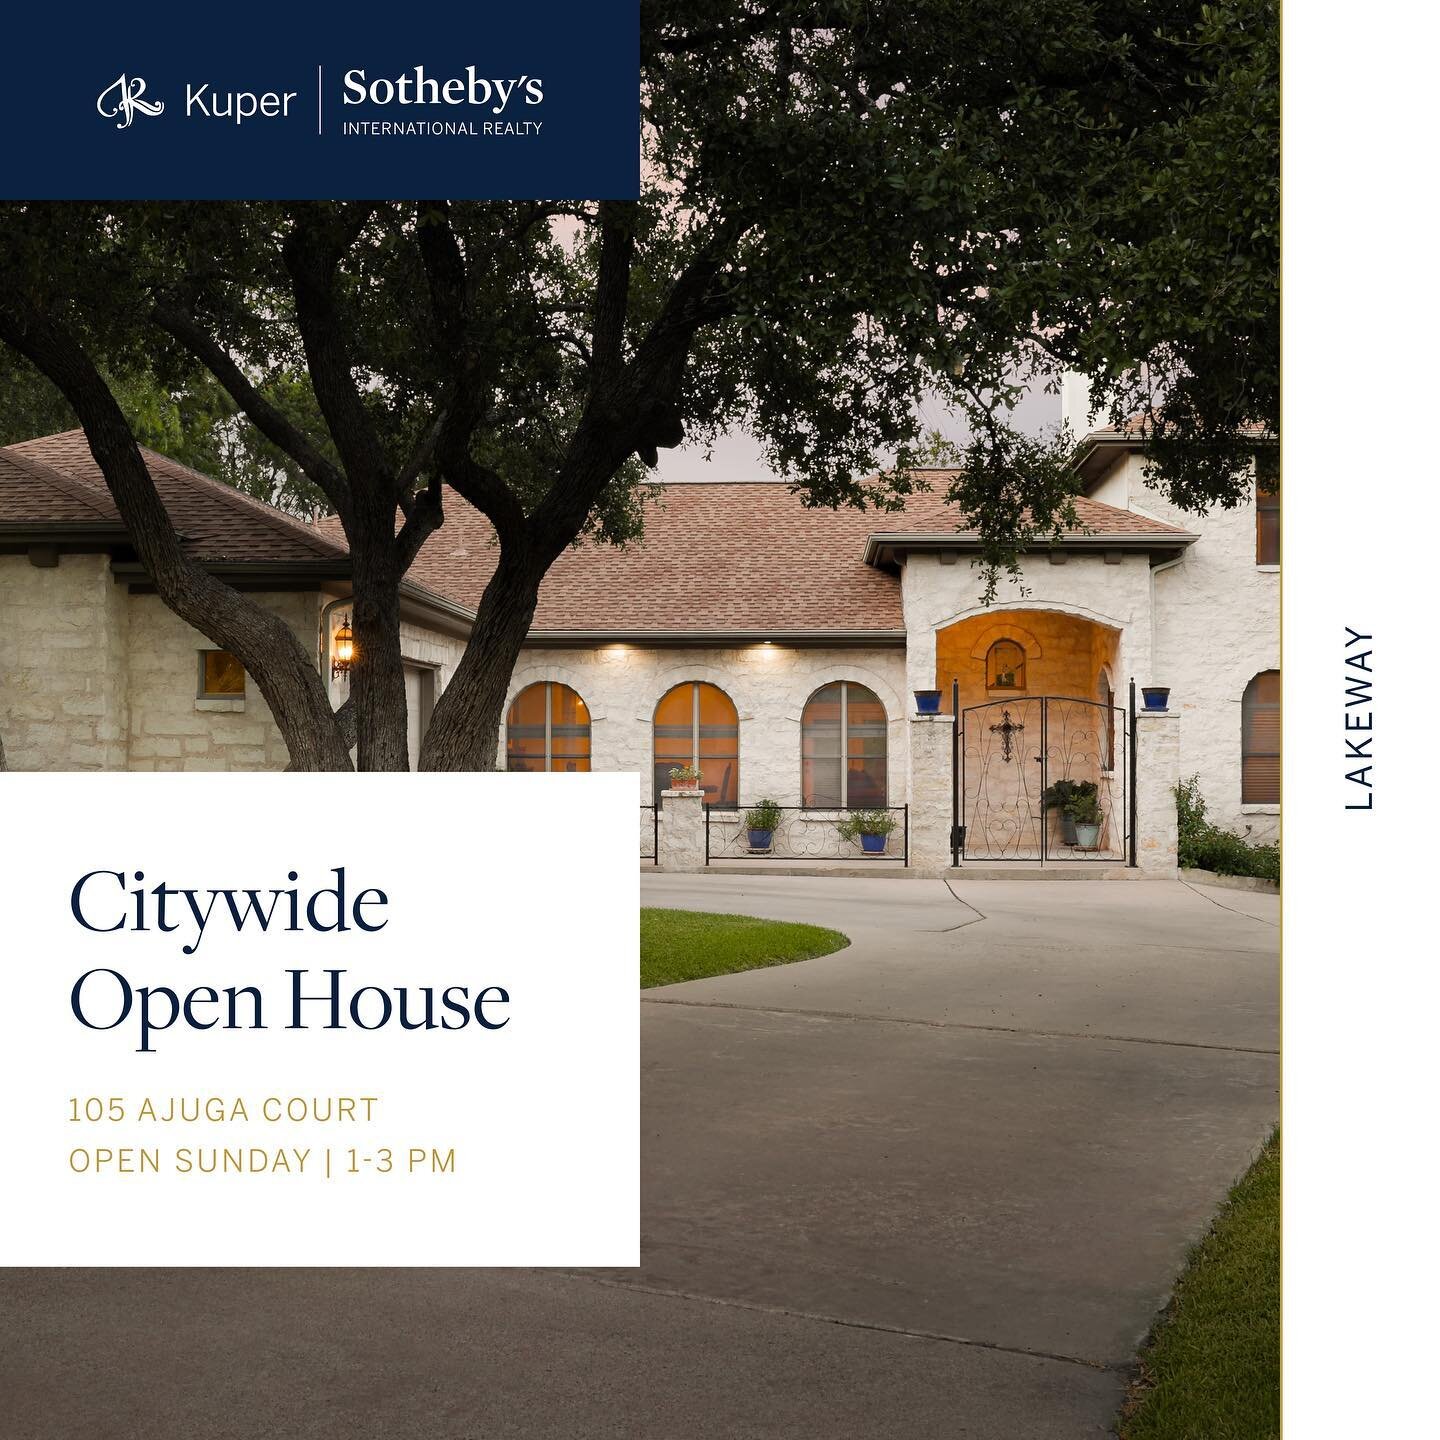 Price Drop 💫
Open House 🏡
Come by and check out 105 Ajuga Ct in Old Lakeway today from 1:00-3:00. Located in one of the most sought after areas of #lakeway  on a quiet cul-de-sac. 

𝐎𝐟𝐟𝐞𝐫𝐞𝐝 𝐚𝐭 $𝟕𝟗𝟗,𝟎𝟎𝟎
Exclusively listed and marketed